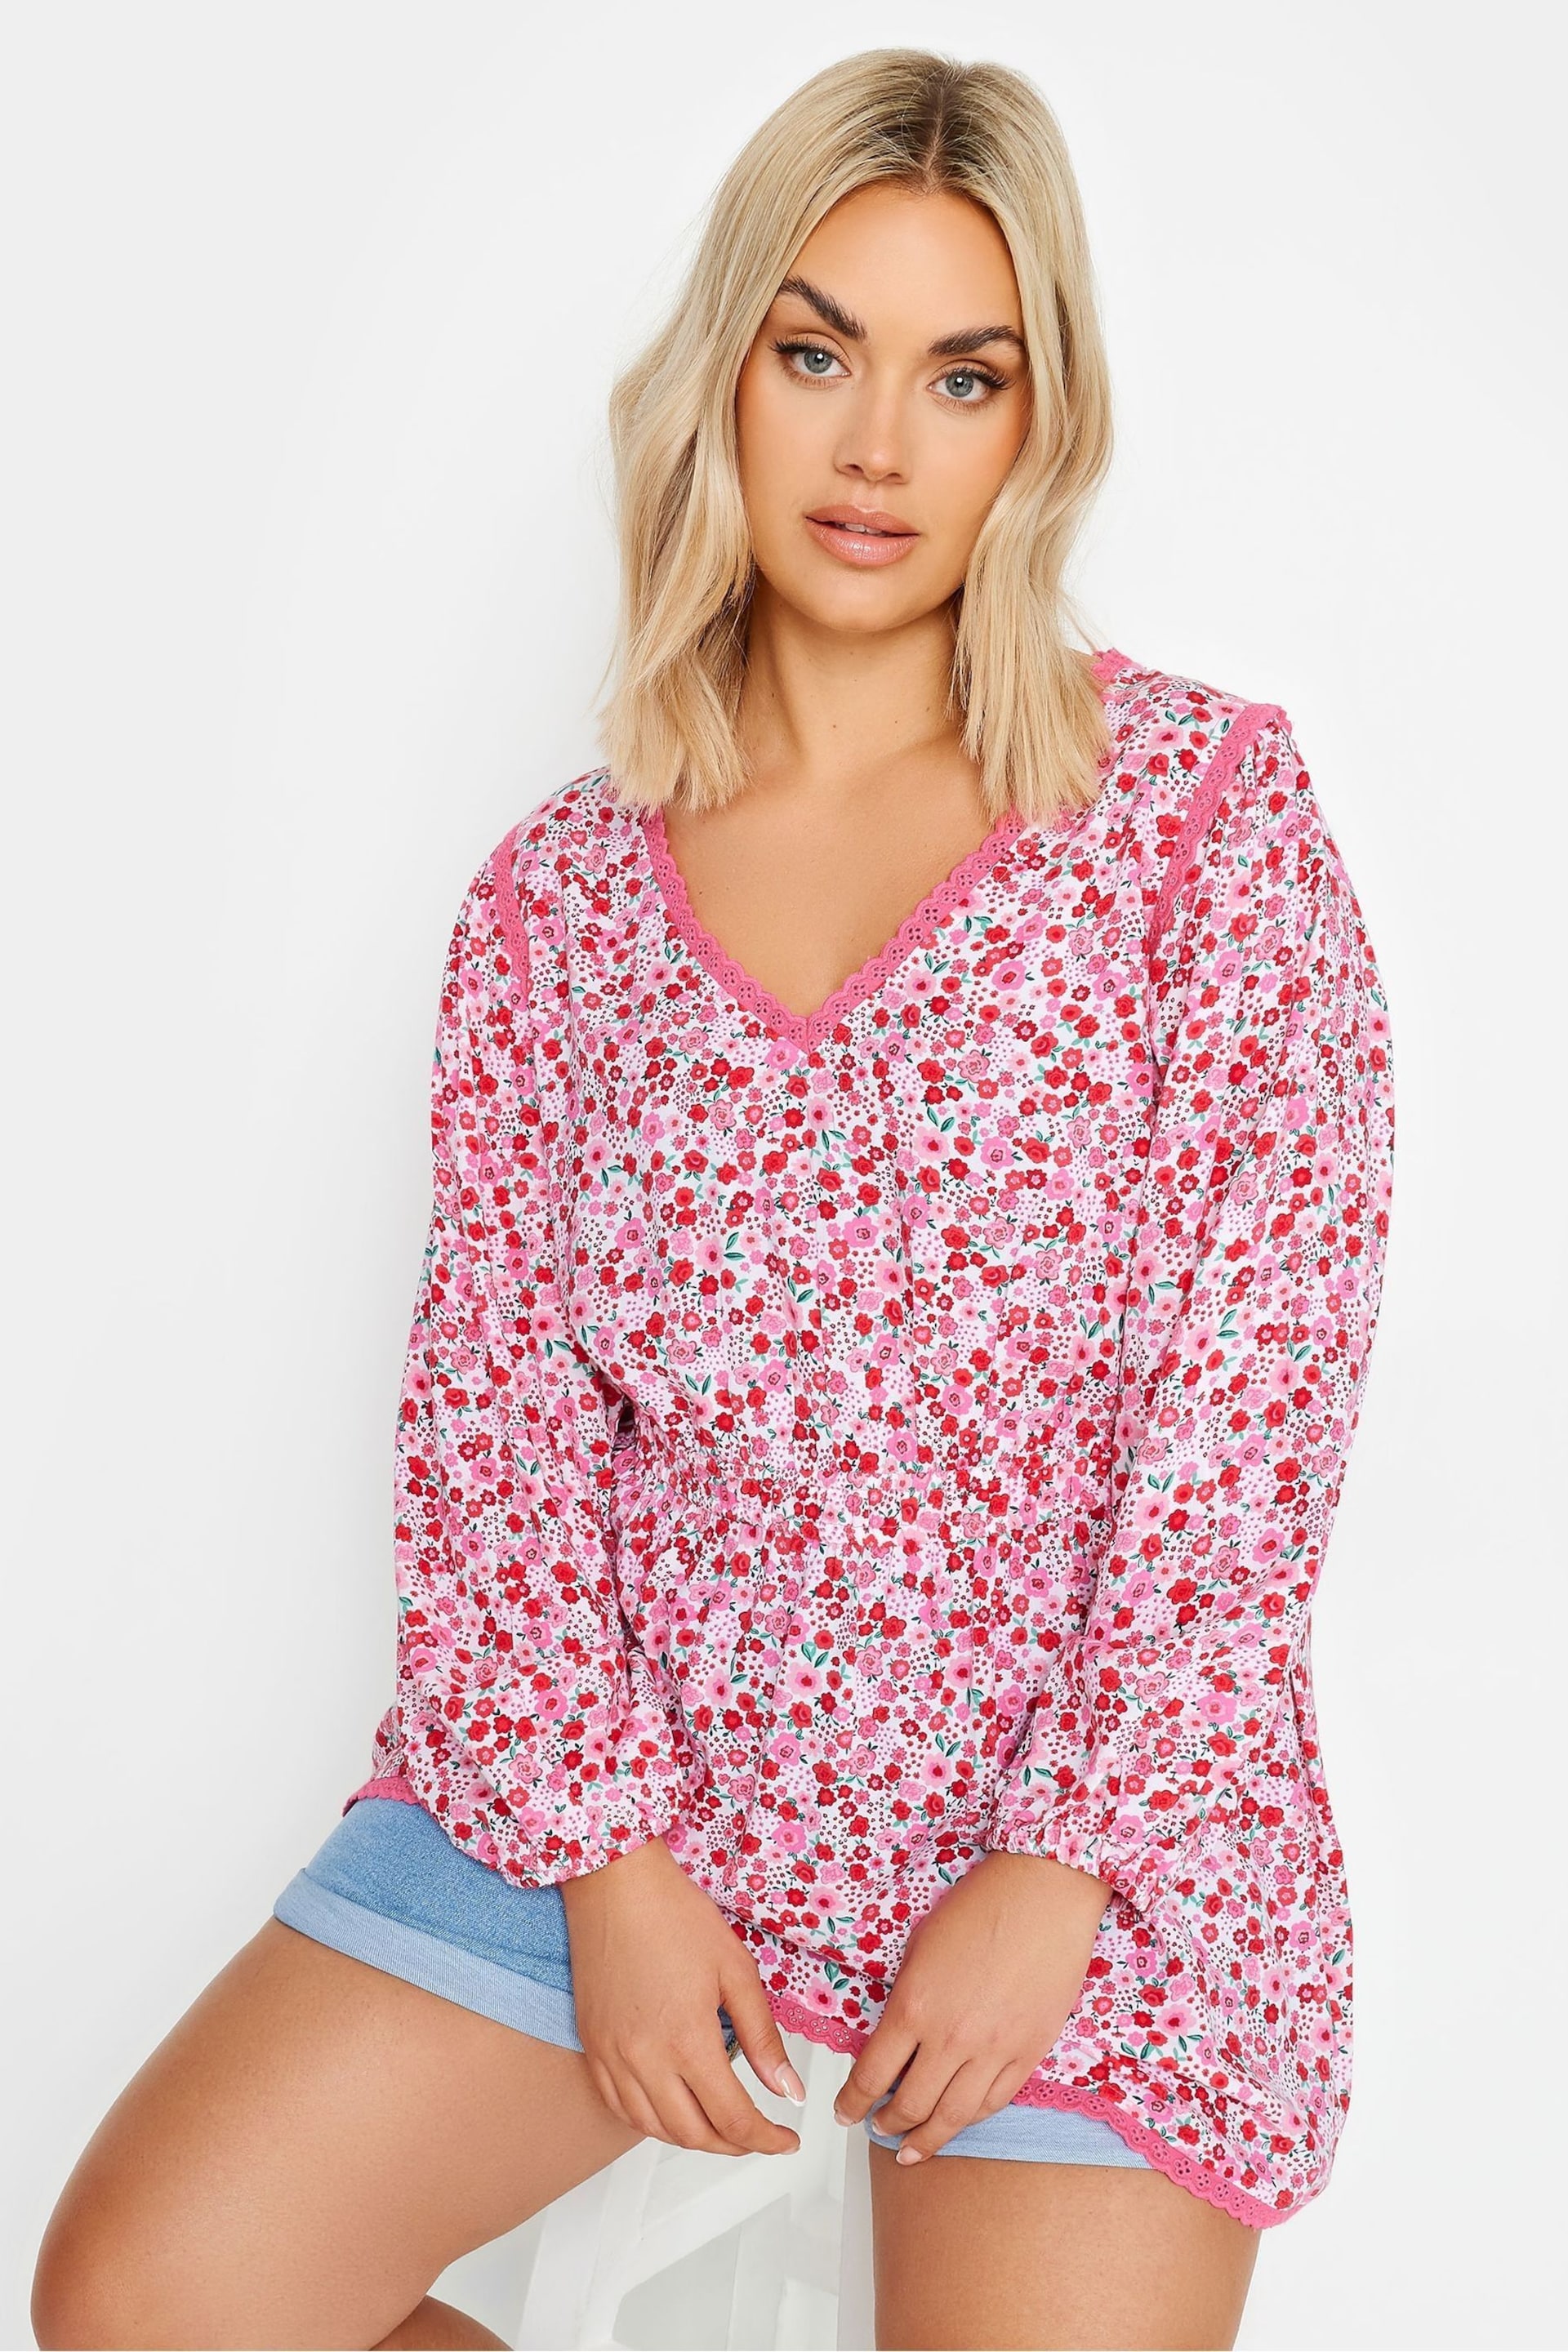 Yours Curve Pink Ditsy Floral Print Smock Top - Image 1 of 5